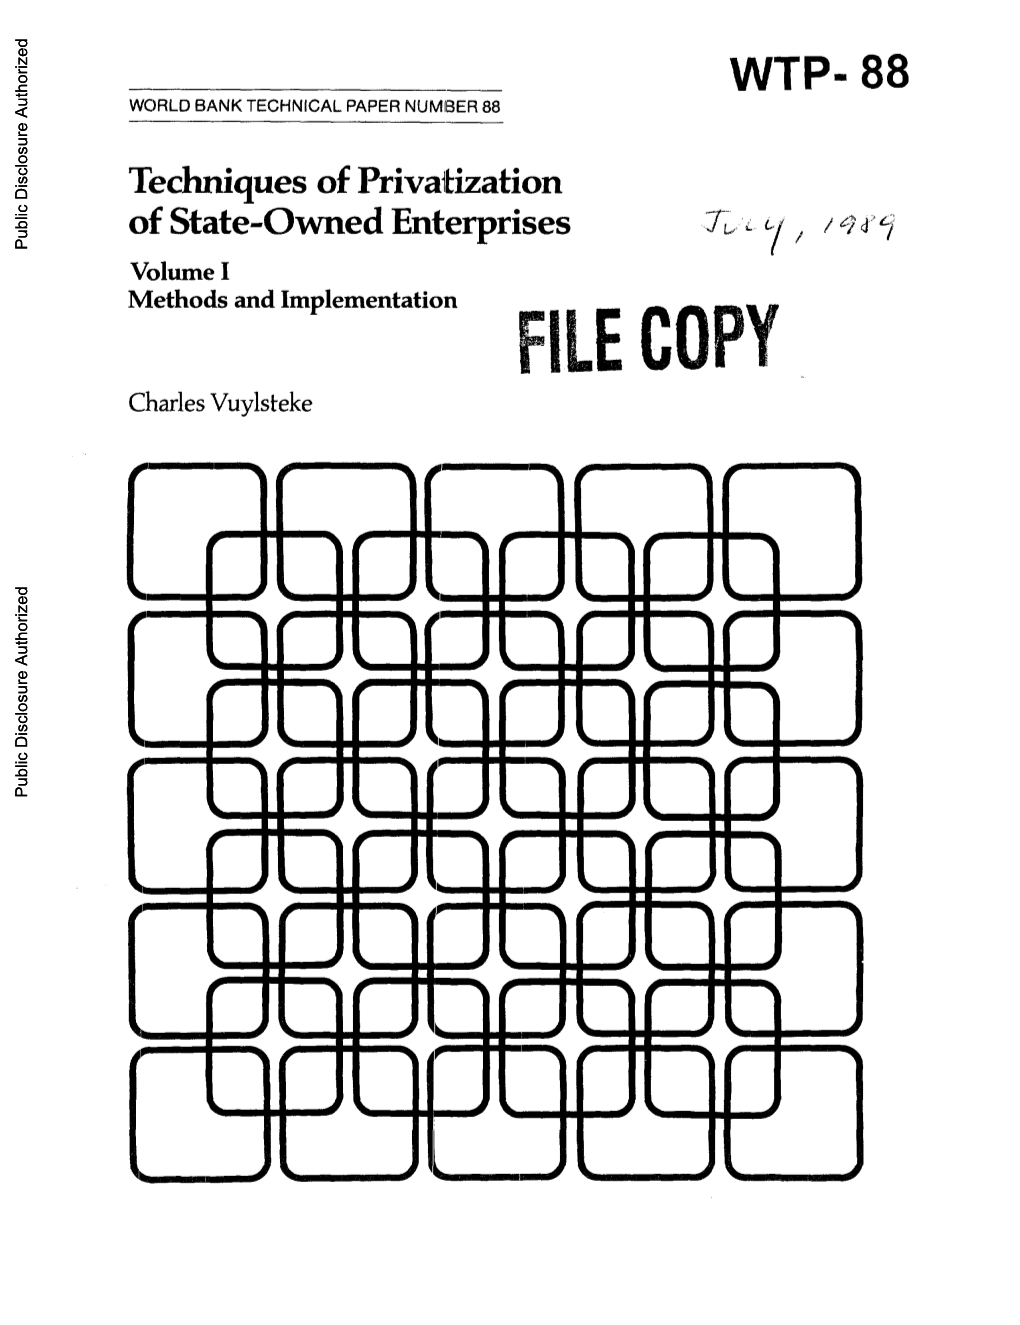 Techniques of Privatization of State-Owned Enterprises J- Y / D 5 Public Disclosure Authorized Volume I Methods and Implementation FILECOPY Charles Vuylsteke